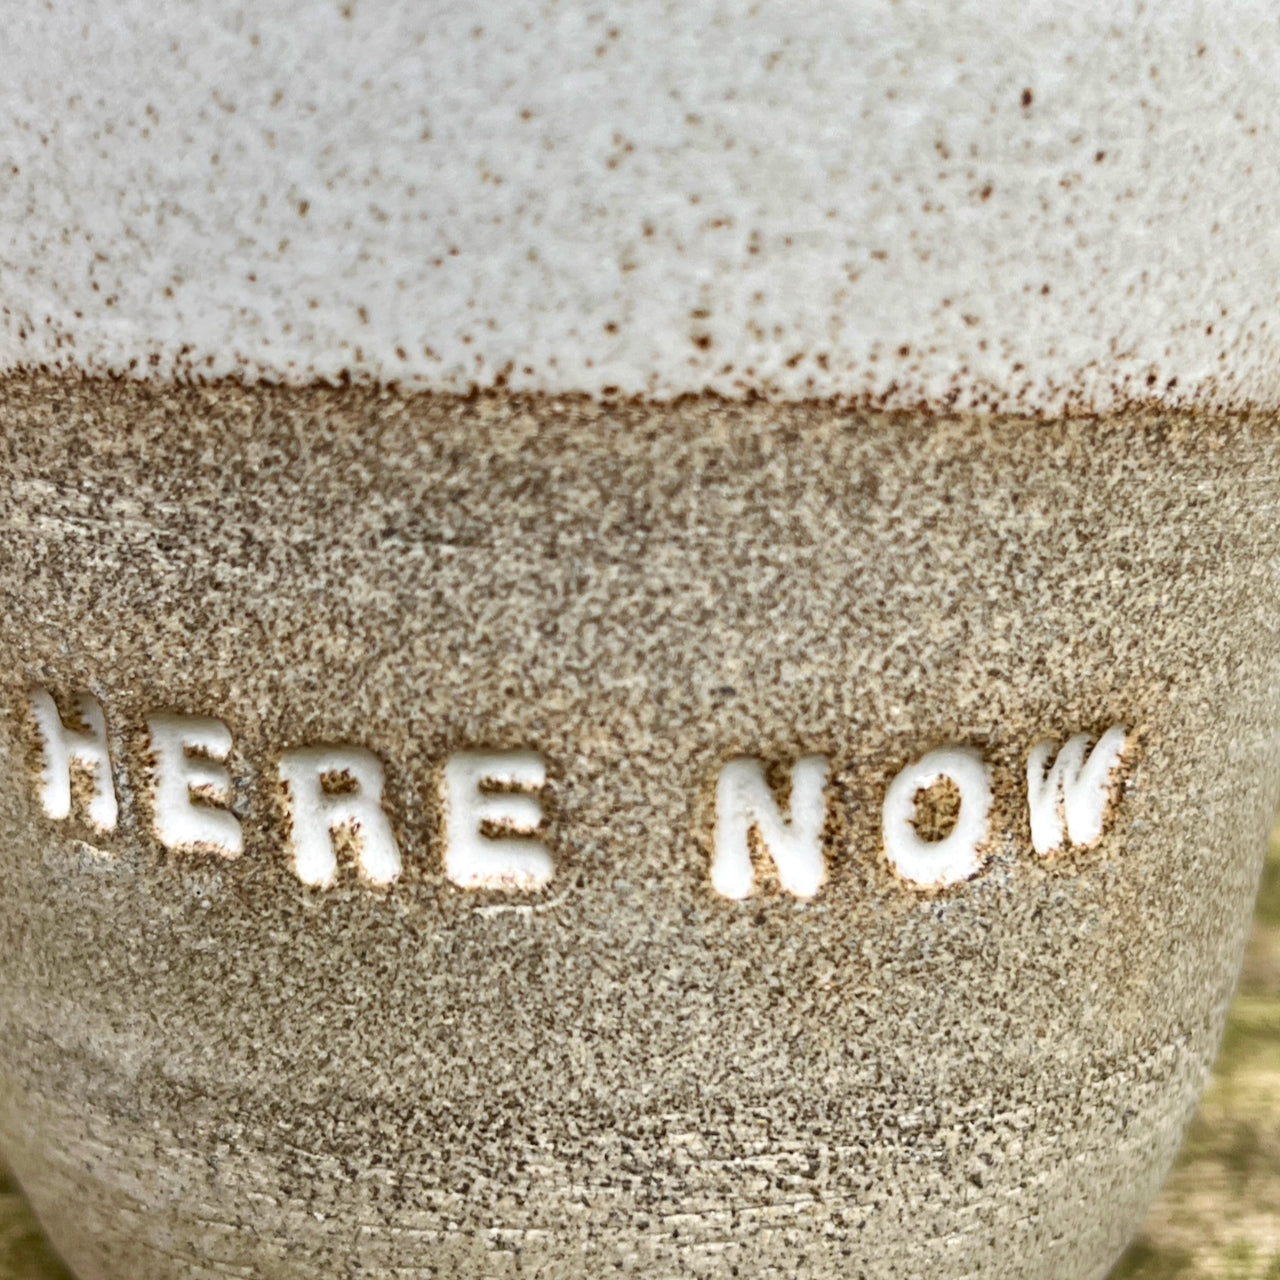 Becher "Be HERE NOW"